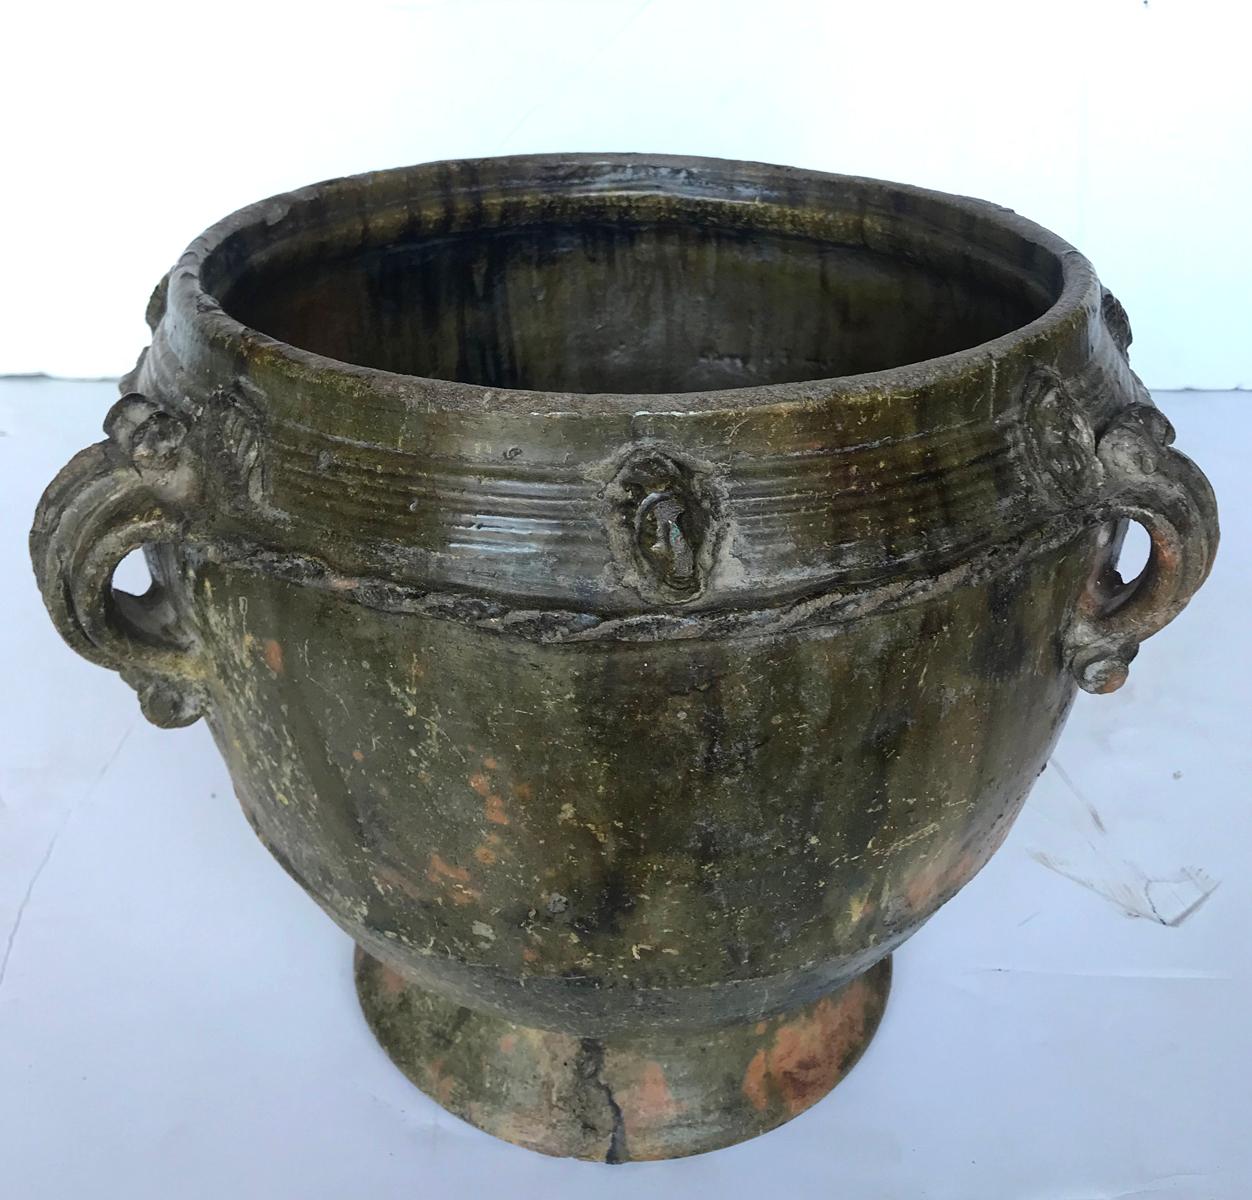 Early 20th century earthenware water storage pot, from the highlands of Central America. Raised and applied decorations throughout depicting faces and botanicals. Green glaze. Handmade, wood fired, resulting in a lovely greenish, earthy